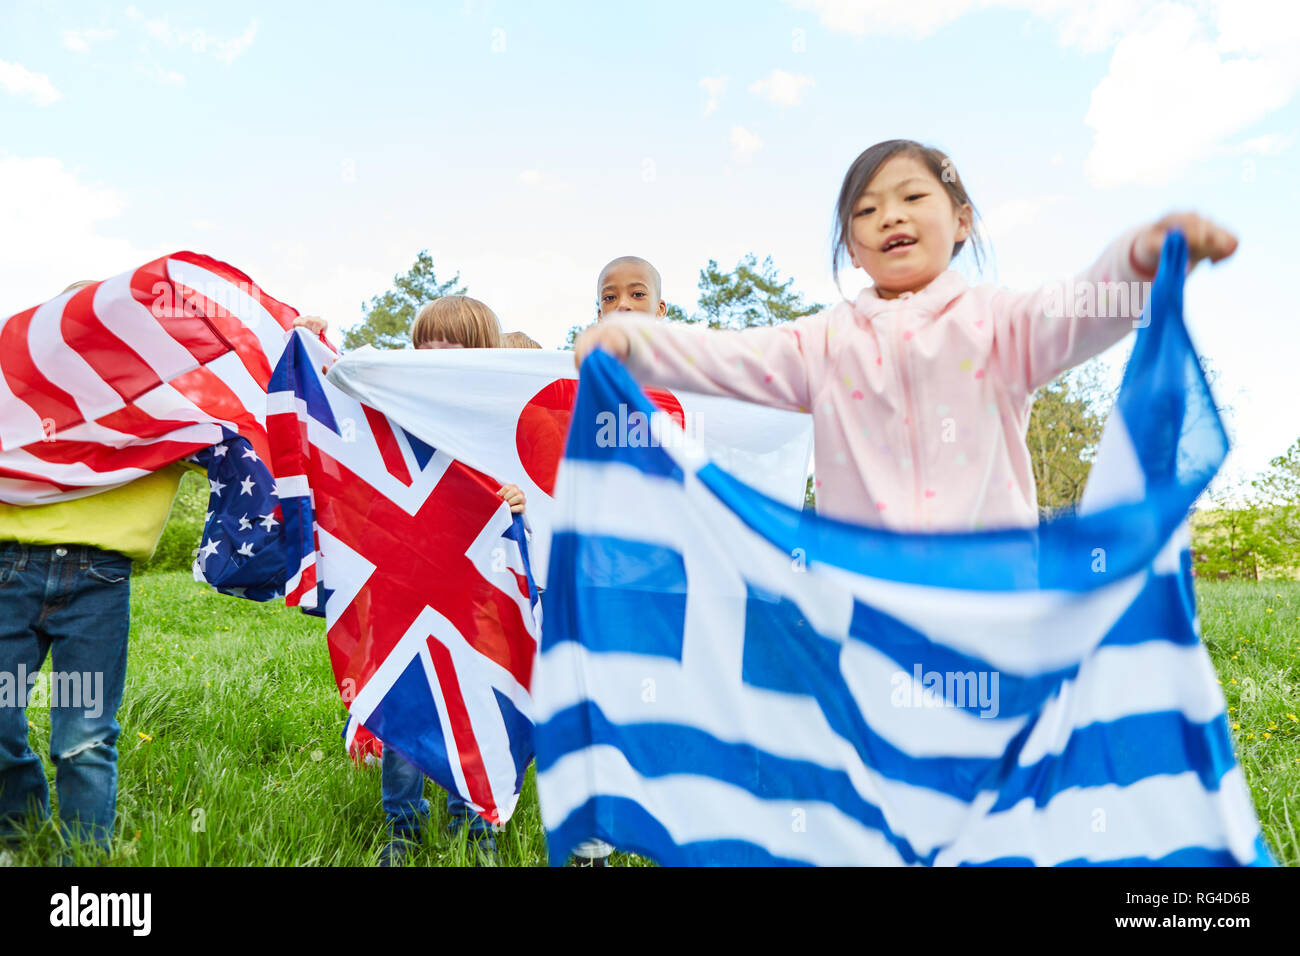 Children show national flags as a symbol of diversity and international understanding Stock Photo